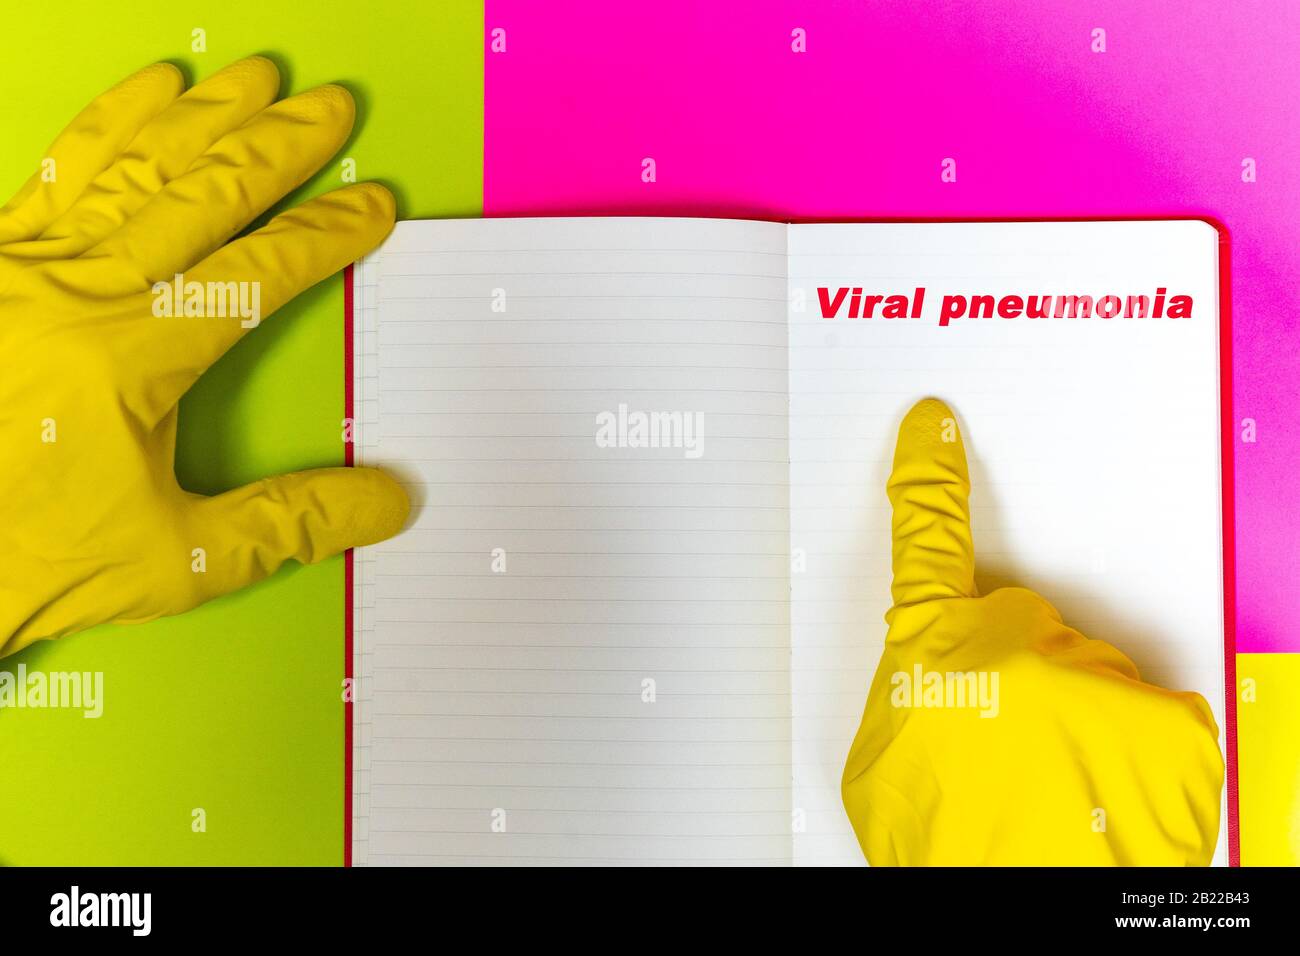 Lettering in Notepad: Viral pneumonia. Healthcare and medical concept. Stock Photo